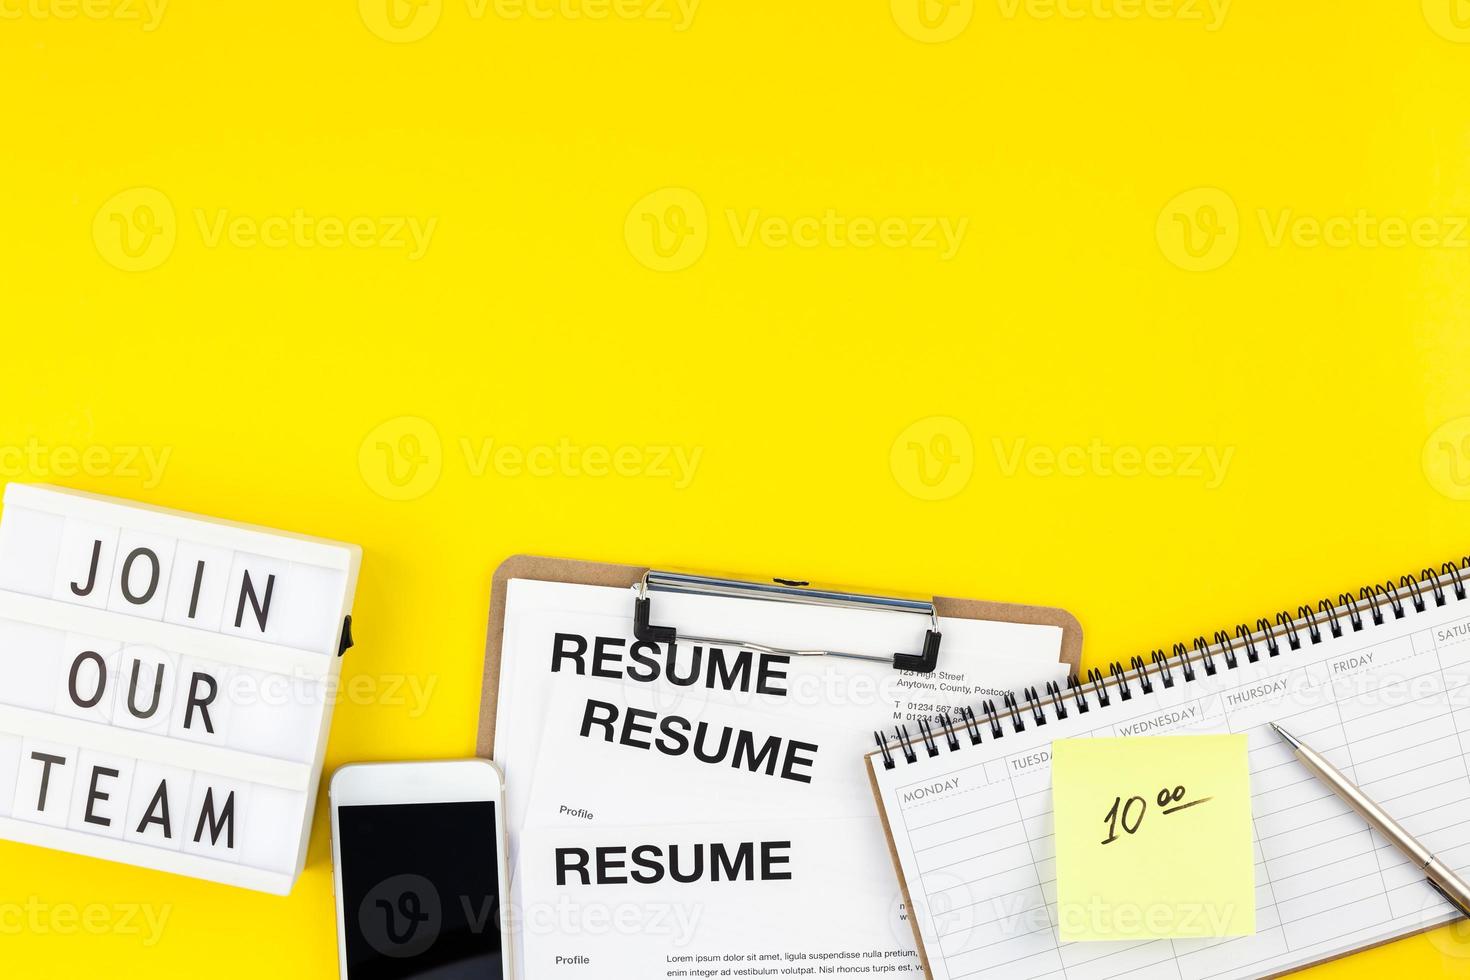 Join our team flat lay on yellow background photo